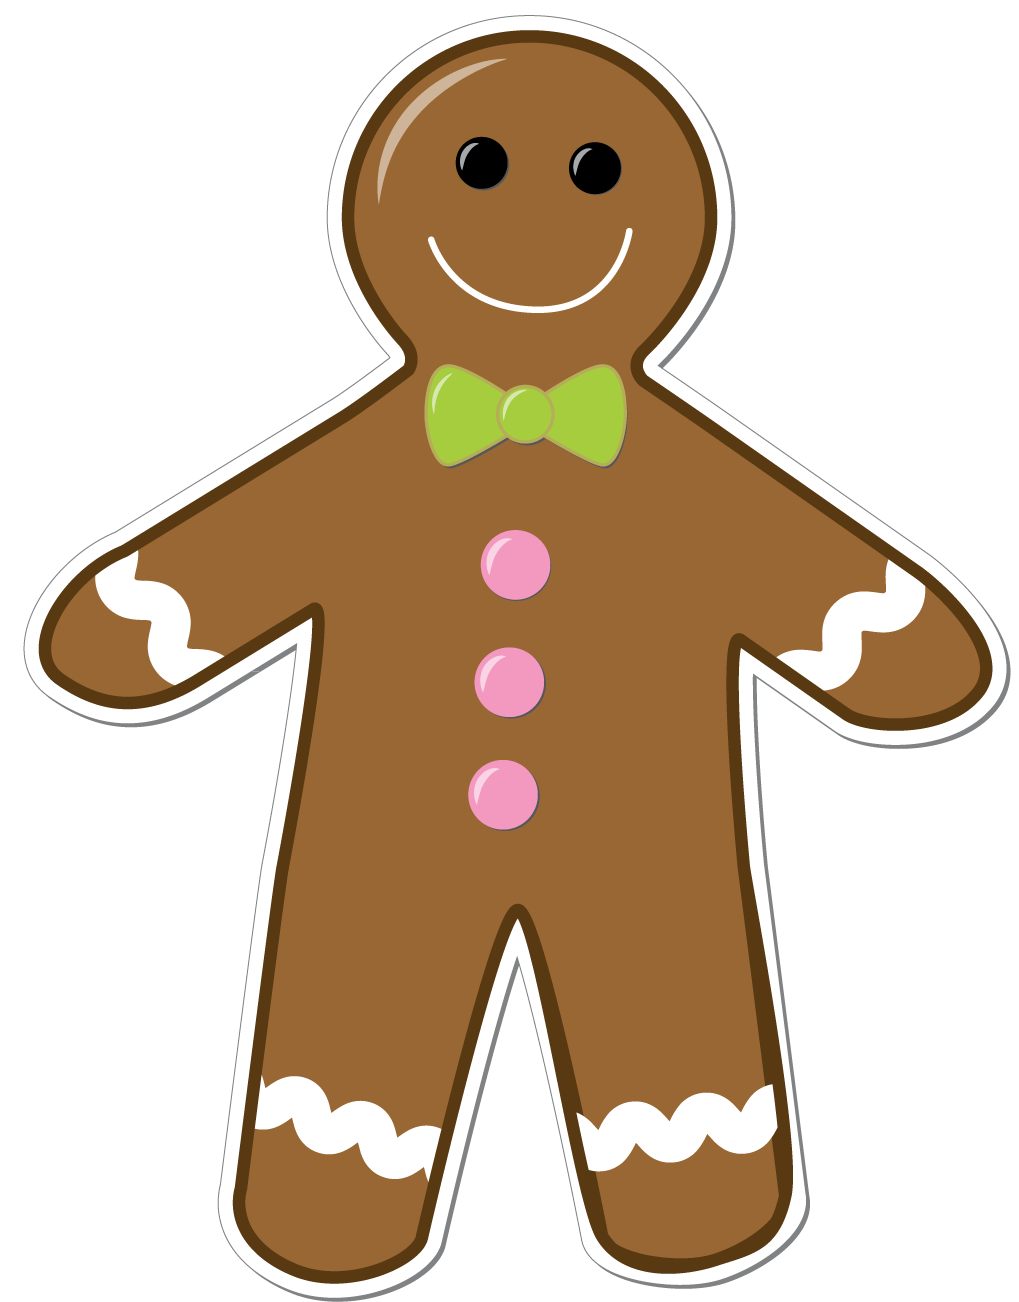 Free Gingerbread Man Cliparts, Download Free Clip Art, Free.